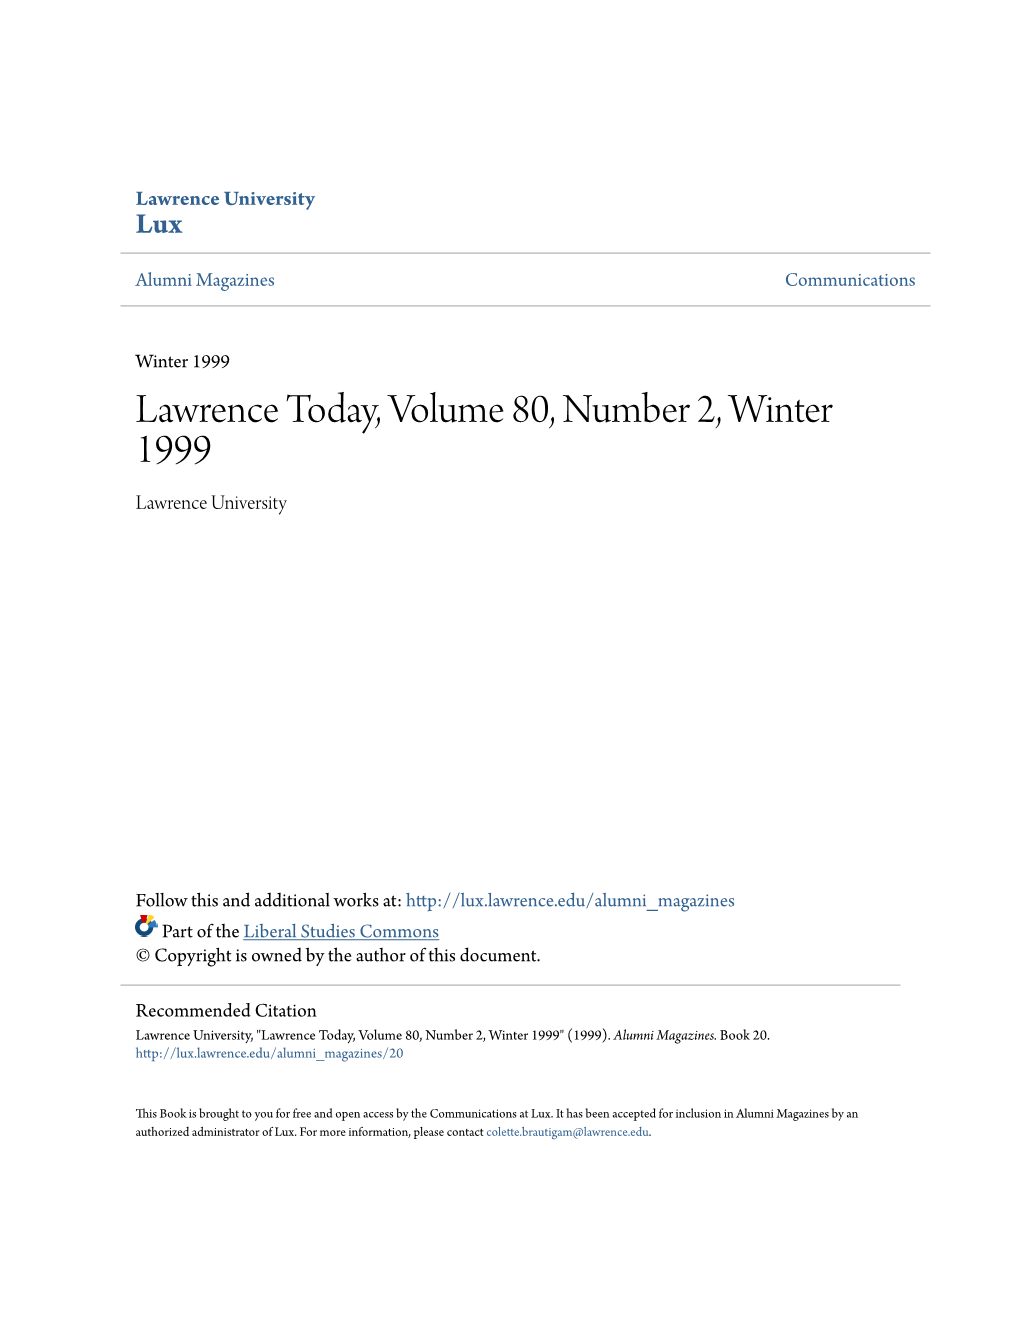 Lawrence Today, Volume 80, Number 2, Winter 1999 Lawrence University